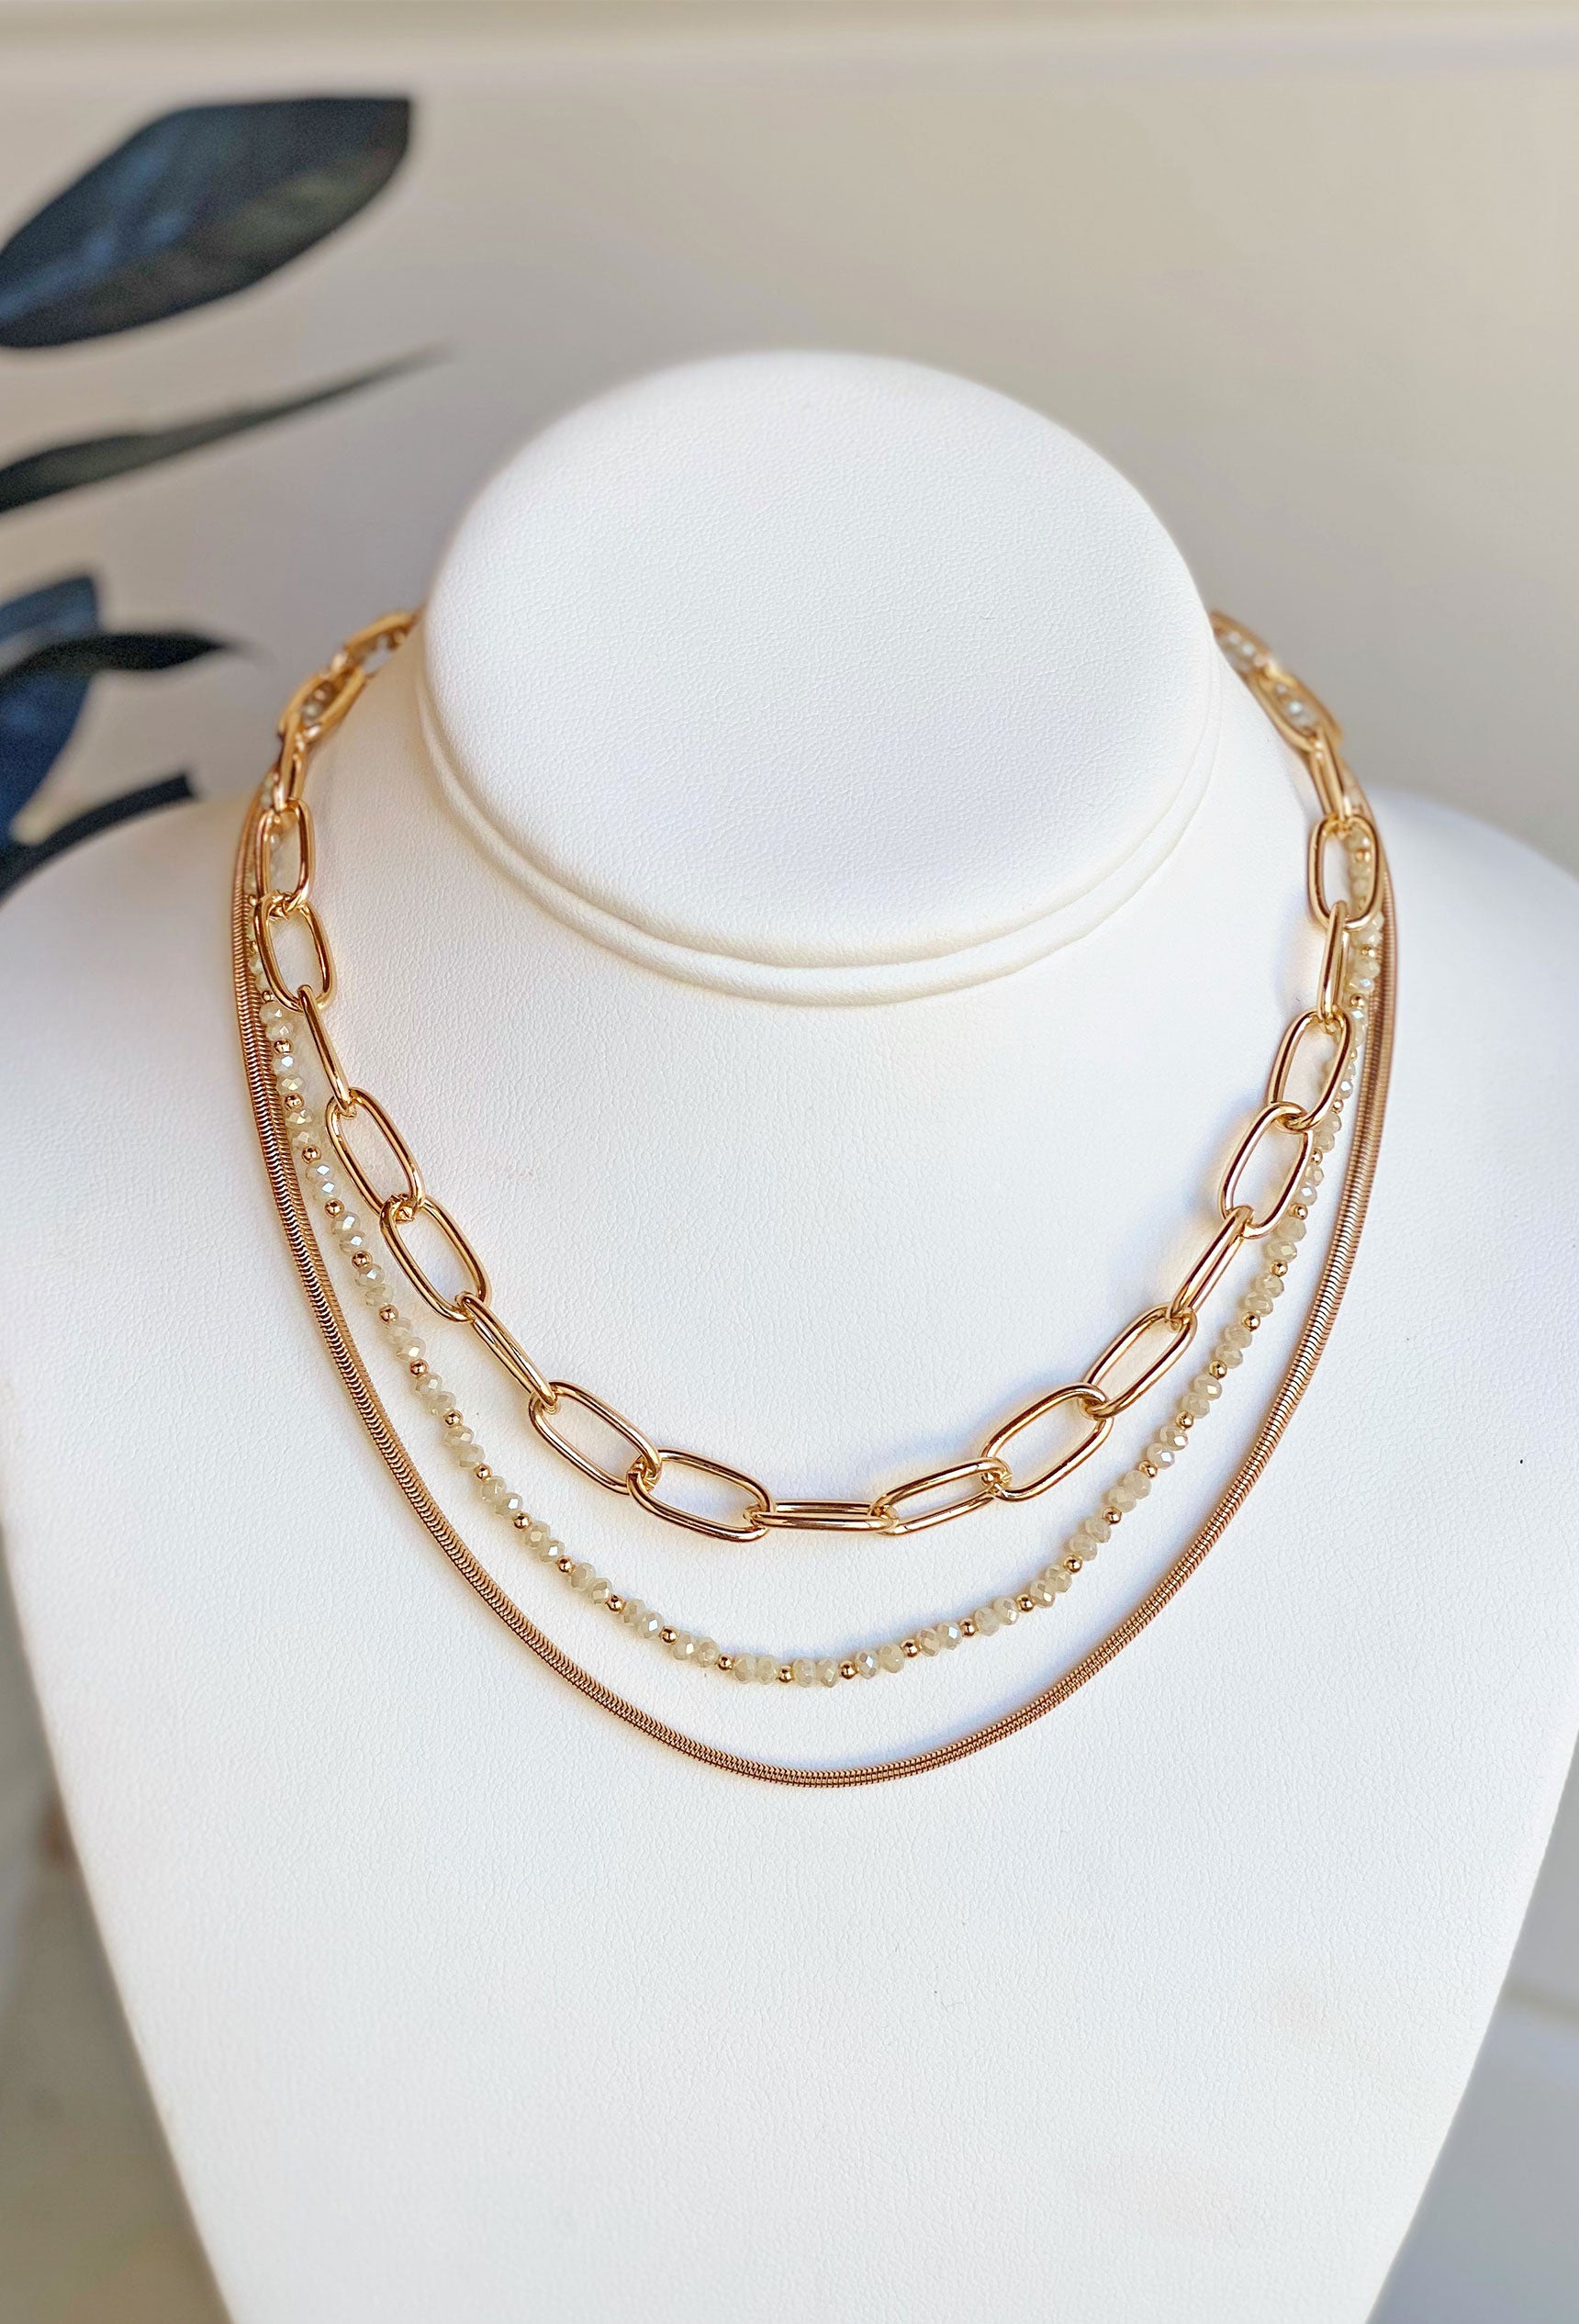 All Yours Layered Necklace, one chain link, one beaded and one gold chain, adjustable